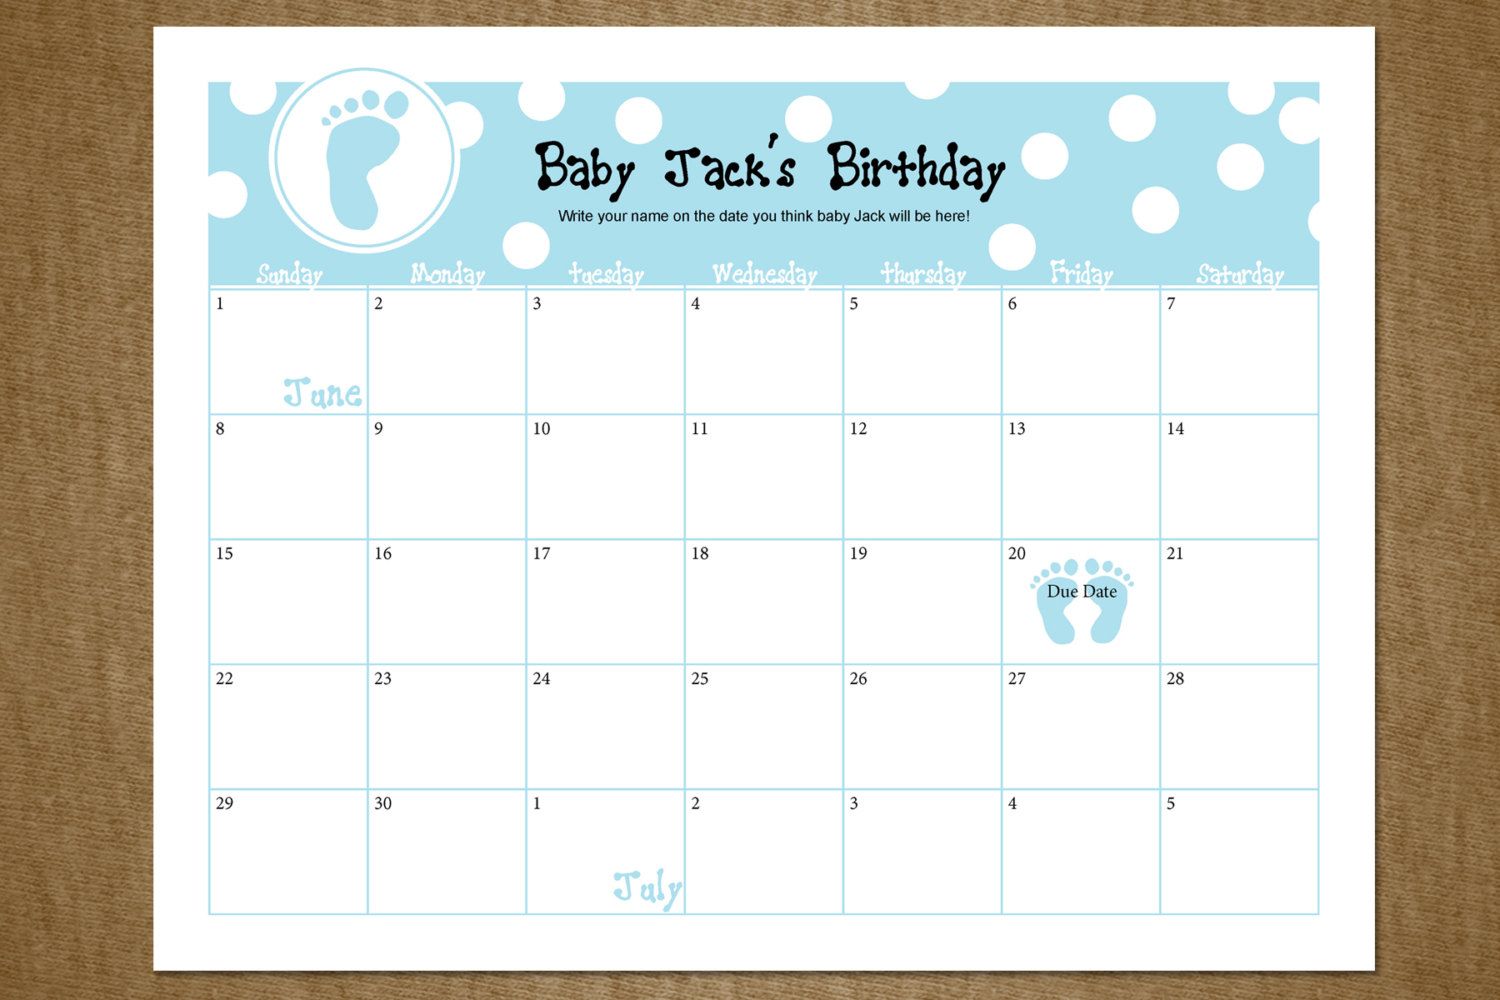 babies due date guess large print out 4